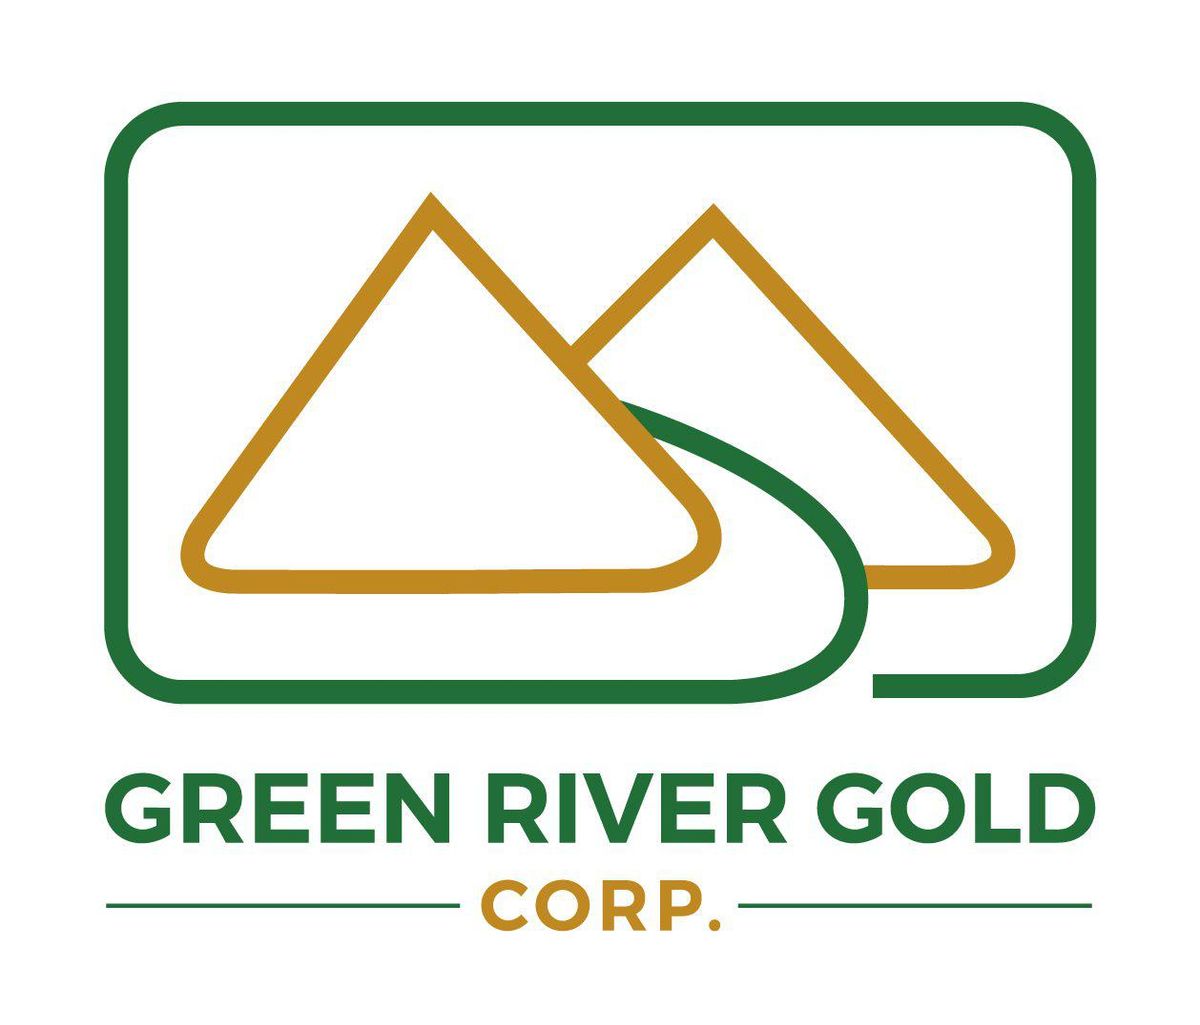 Green River Gold Corp. Intercepts Its Highest XRF Nickel Results to Date at Surface in Zone 2, 8 Kilometers from Its Original Discovery Zone at the Quesnel Nickel/Talc/Magnesium Project